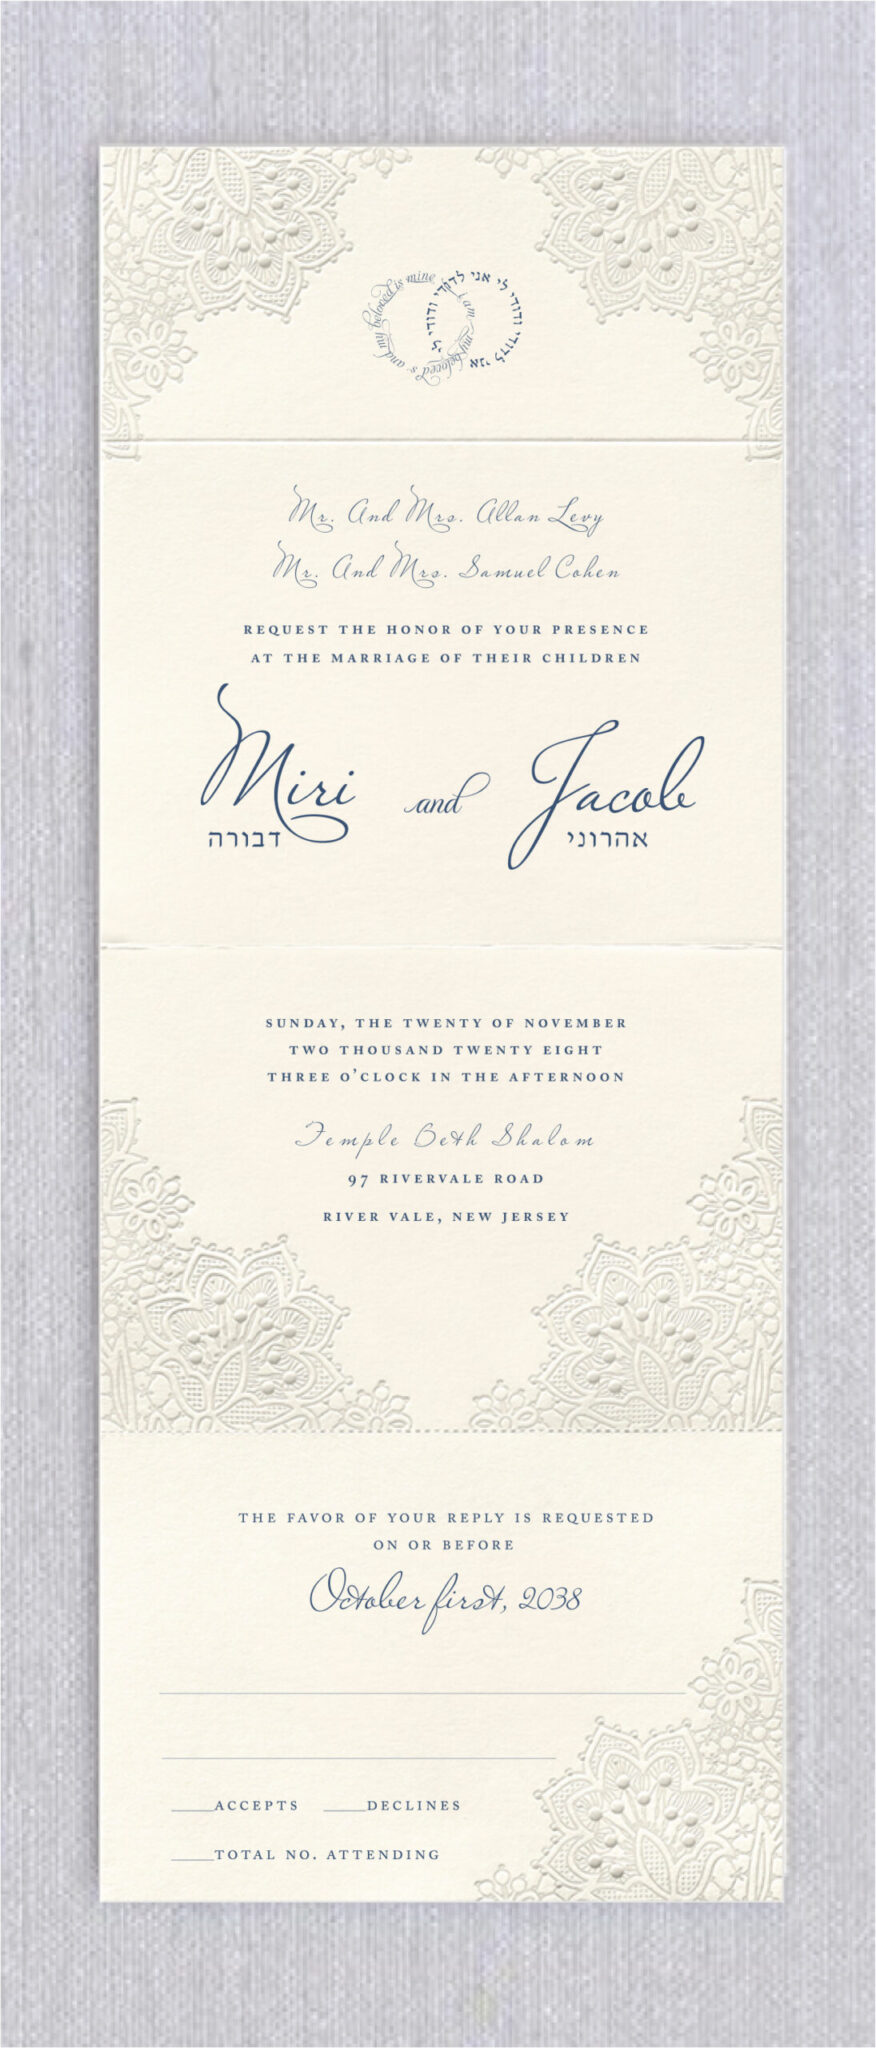 A lacy floral pattern embossed with pearl foil decorates the corners of this simply styled All-In-One Jewish Wedding Invitations with RSVP Cards and Seal 'n Send wedding invitation, which opens to reveal a classic layout that puts the focus where it belongs: on the details of your wedding.